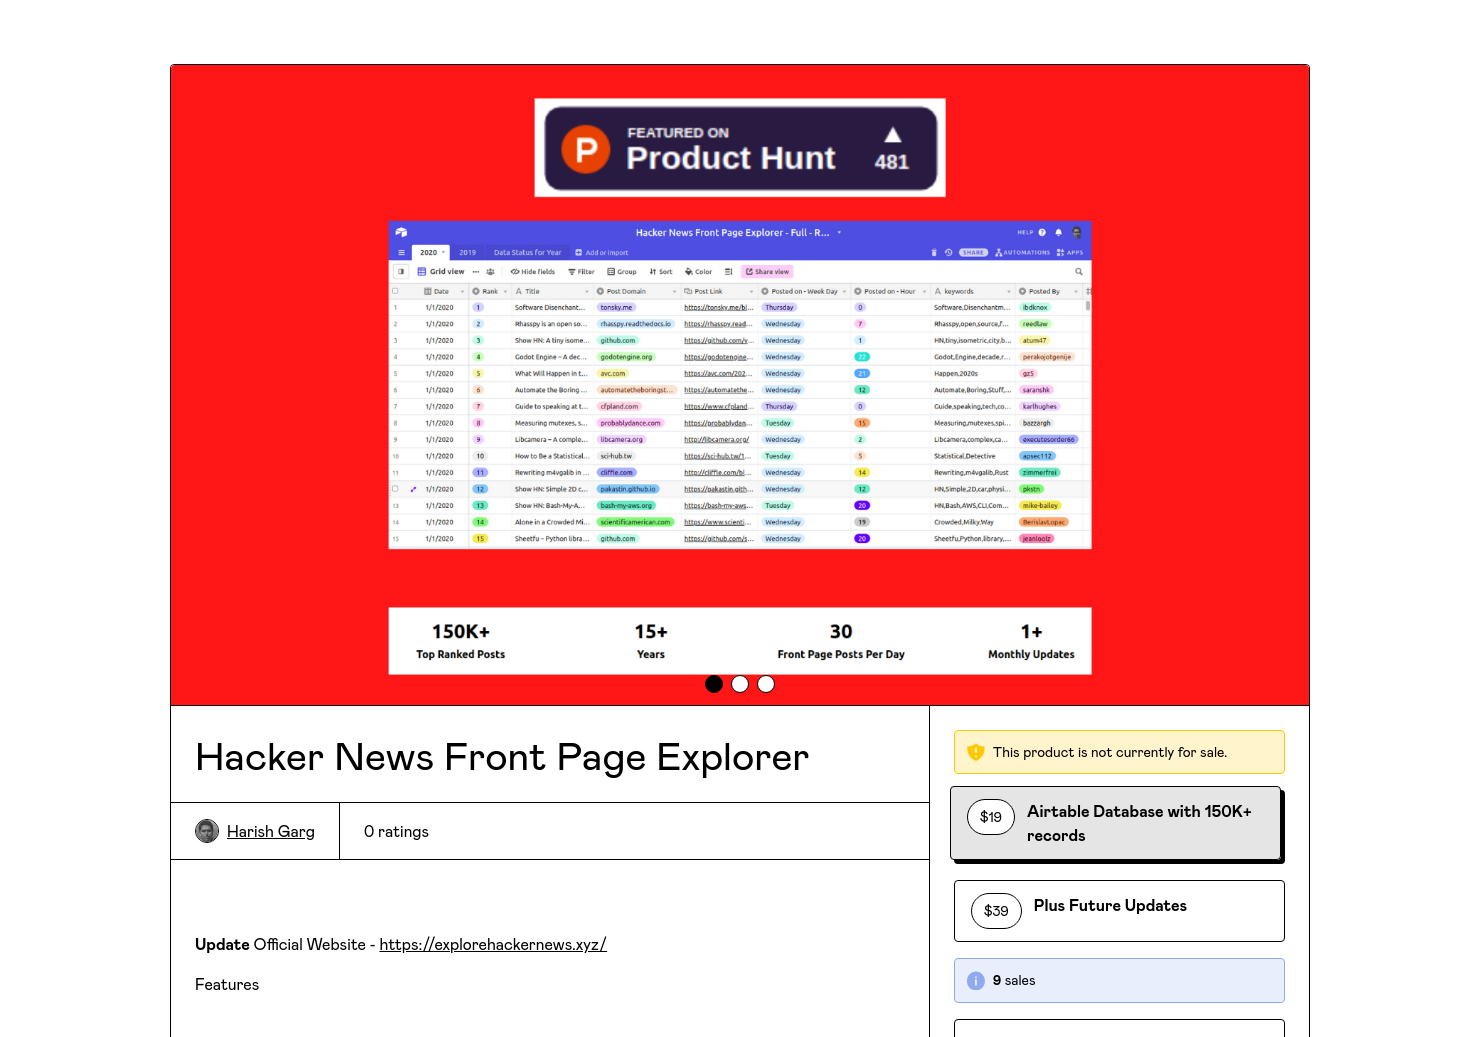 Hacker News Front Page Explorer